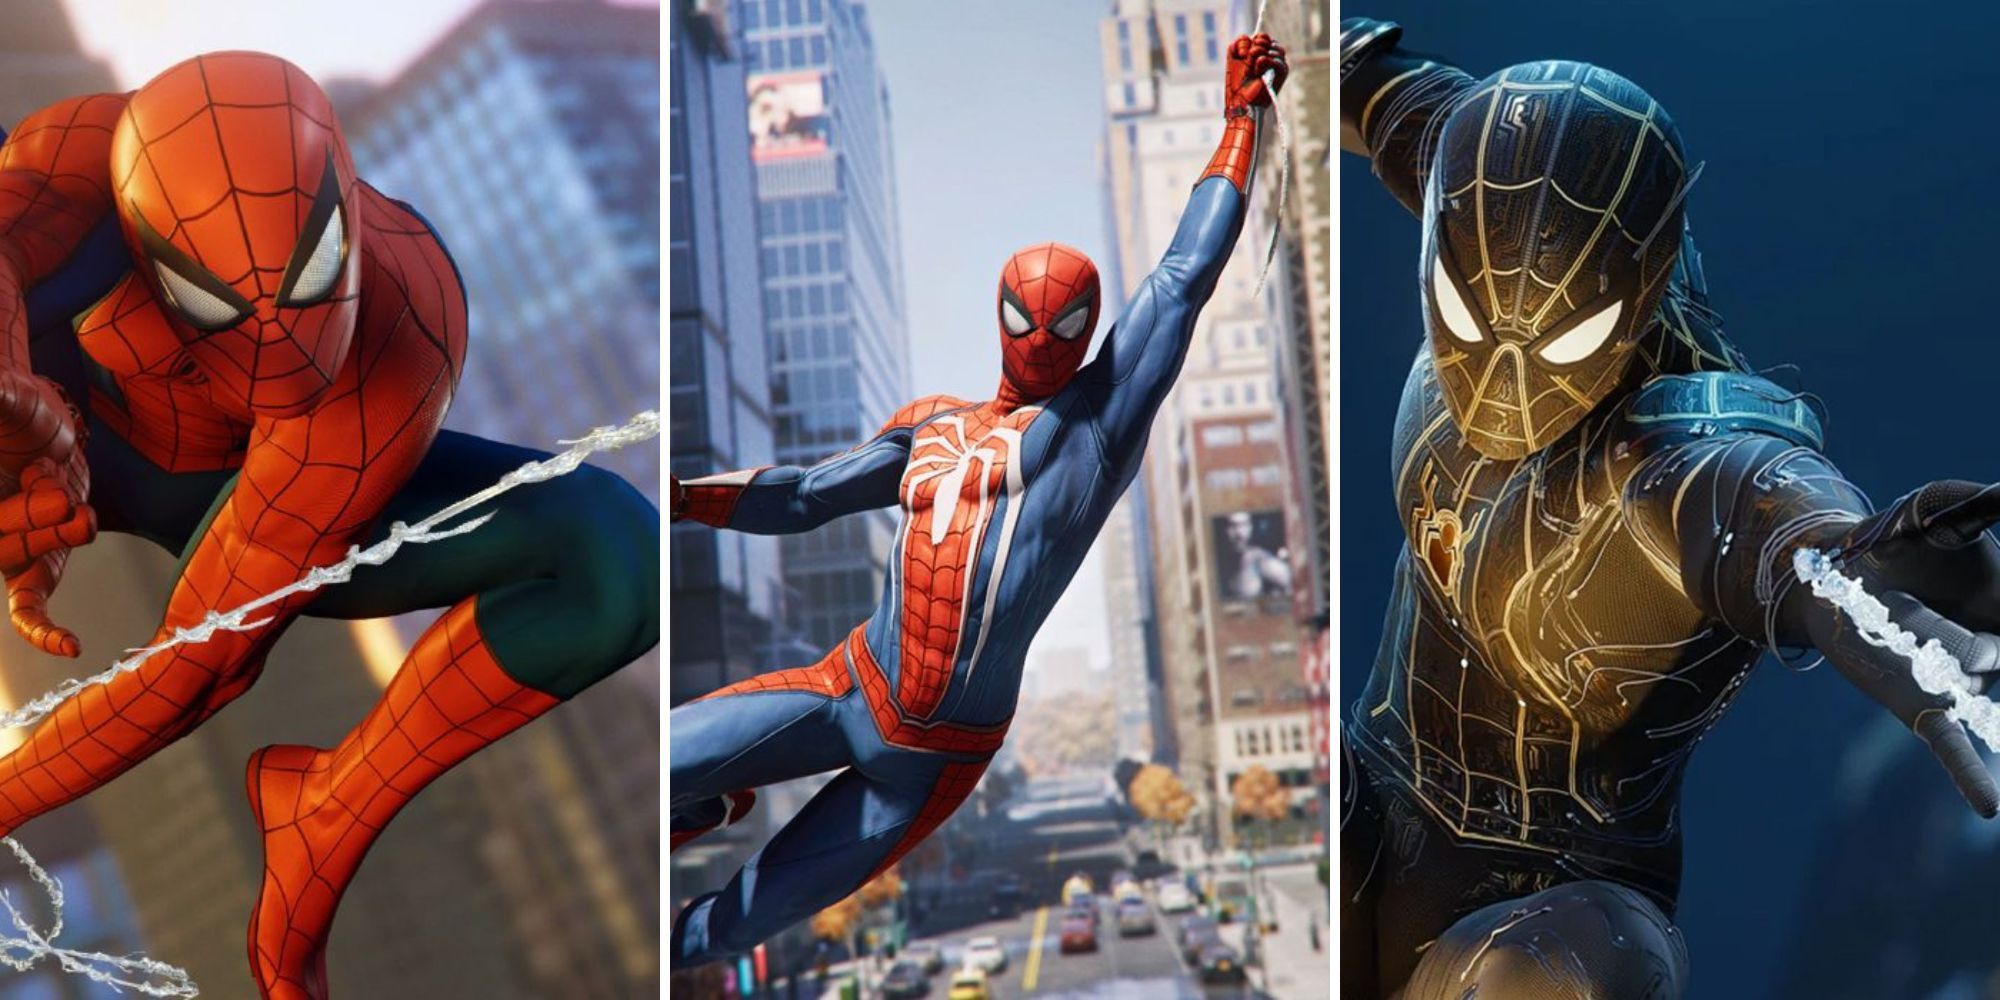 Three different pictures of Spider-Man from the game Marvel's Spider-Man using webs